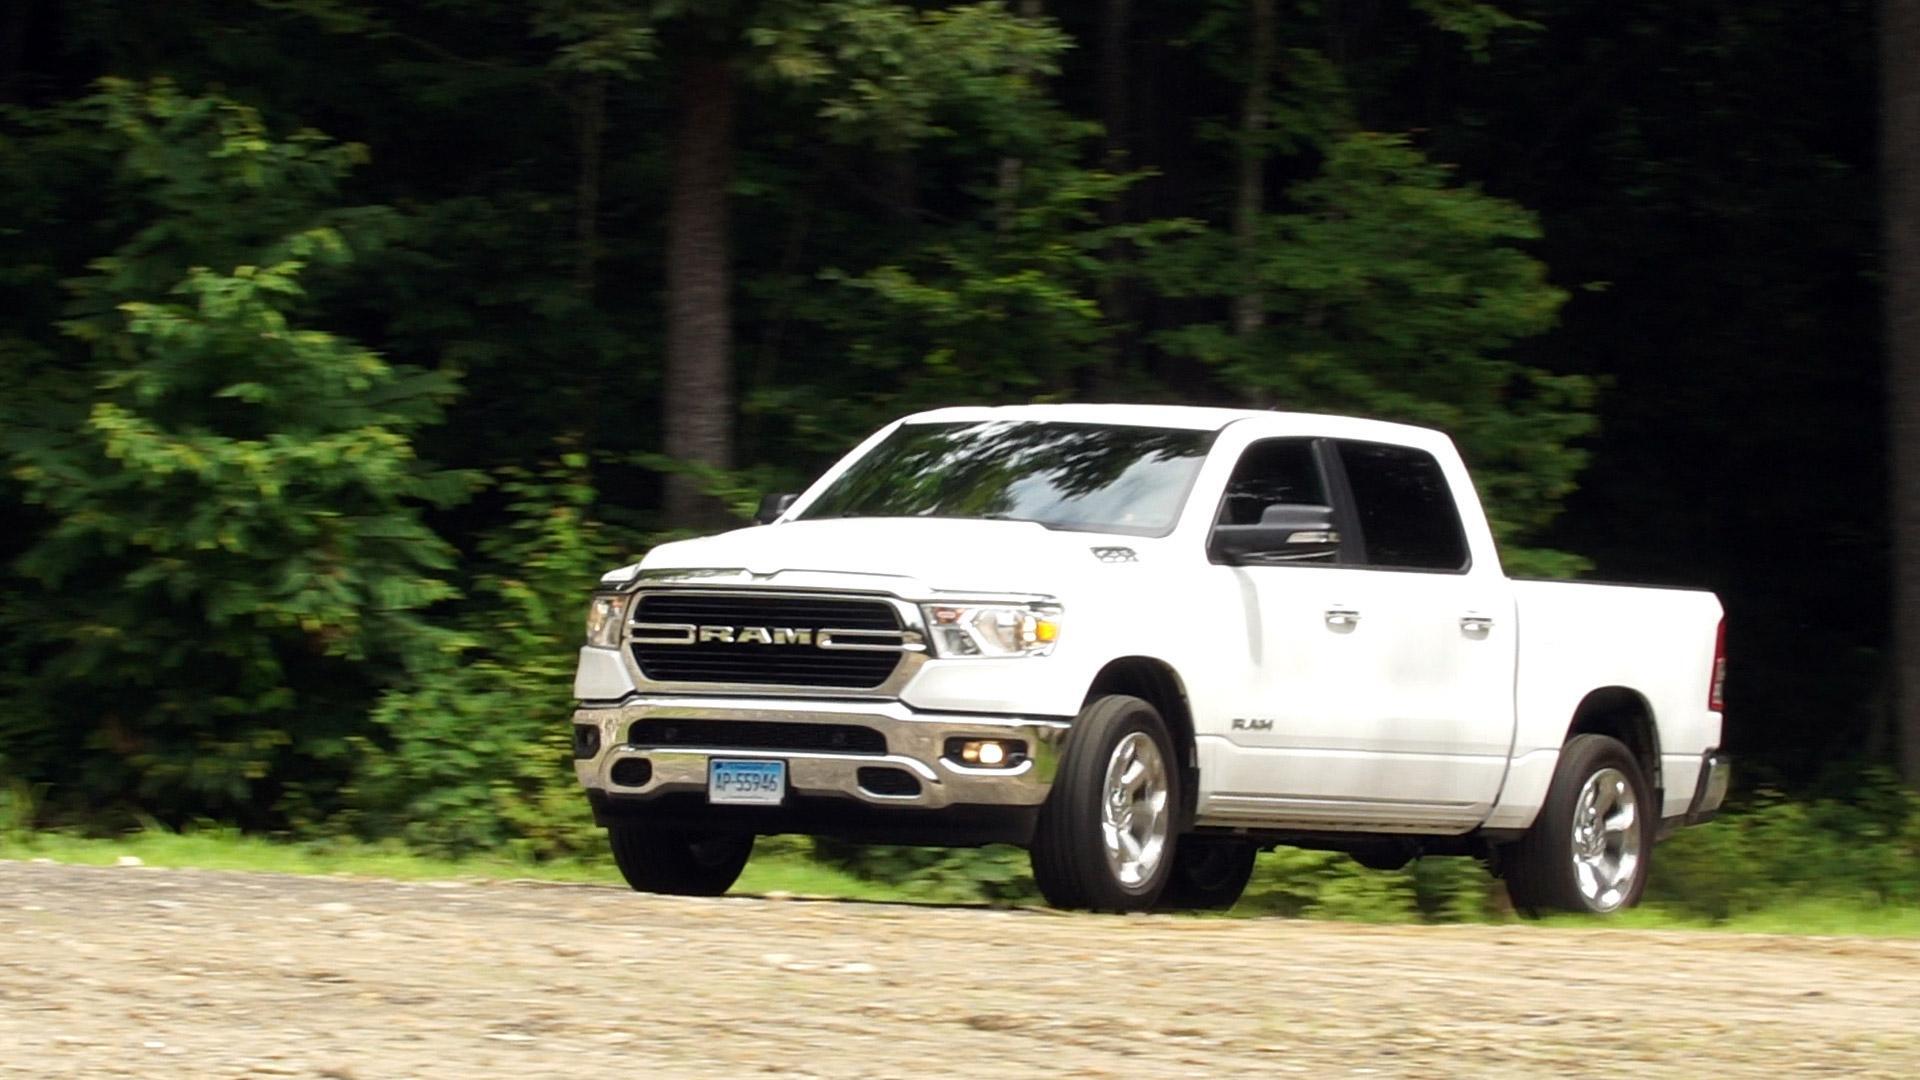 2022 Ram 1500 Reviews, Ratings, Prices - Consumer Reports